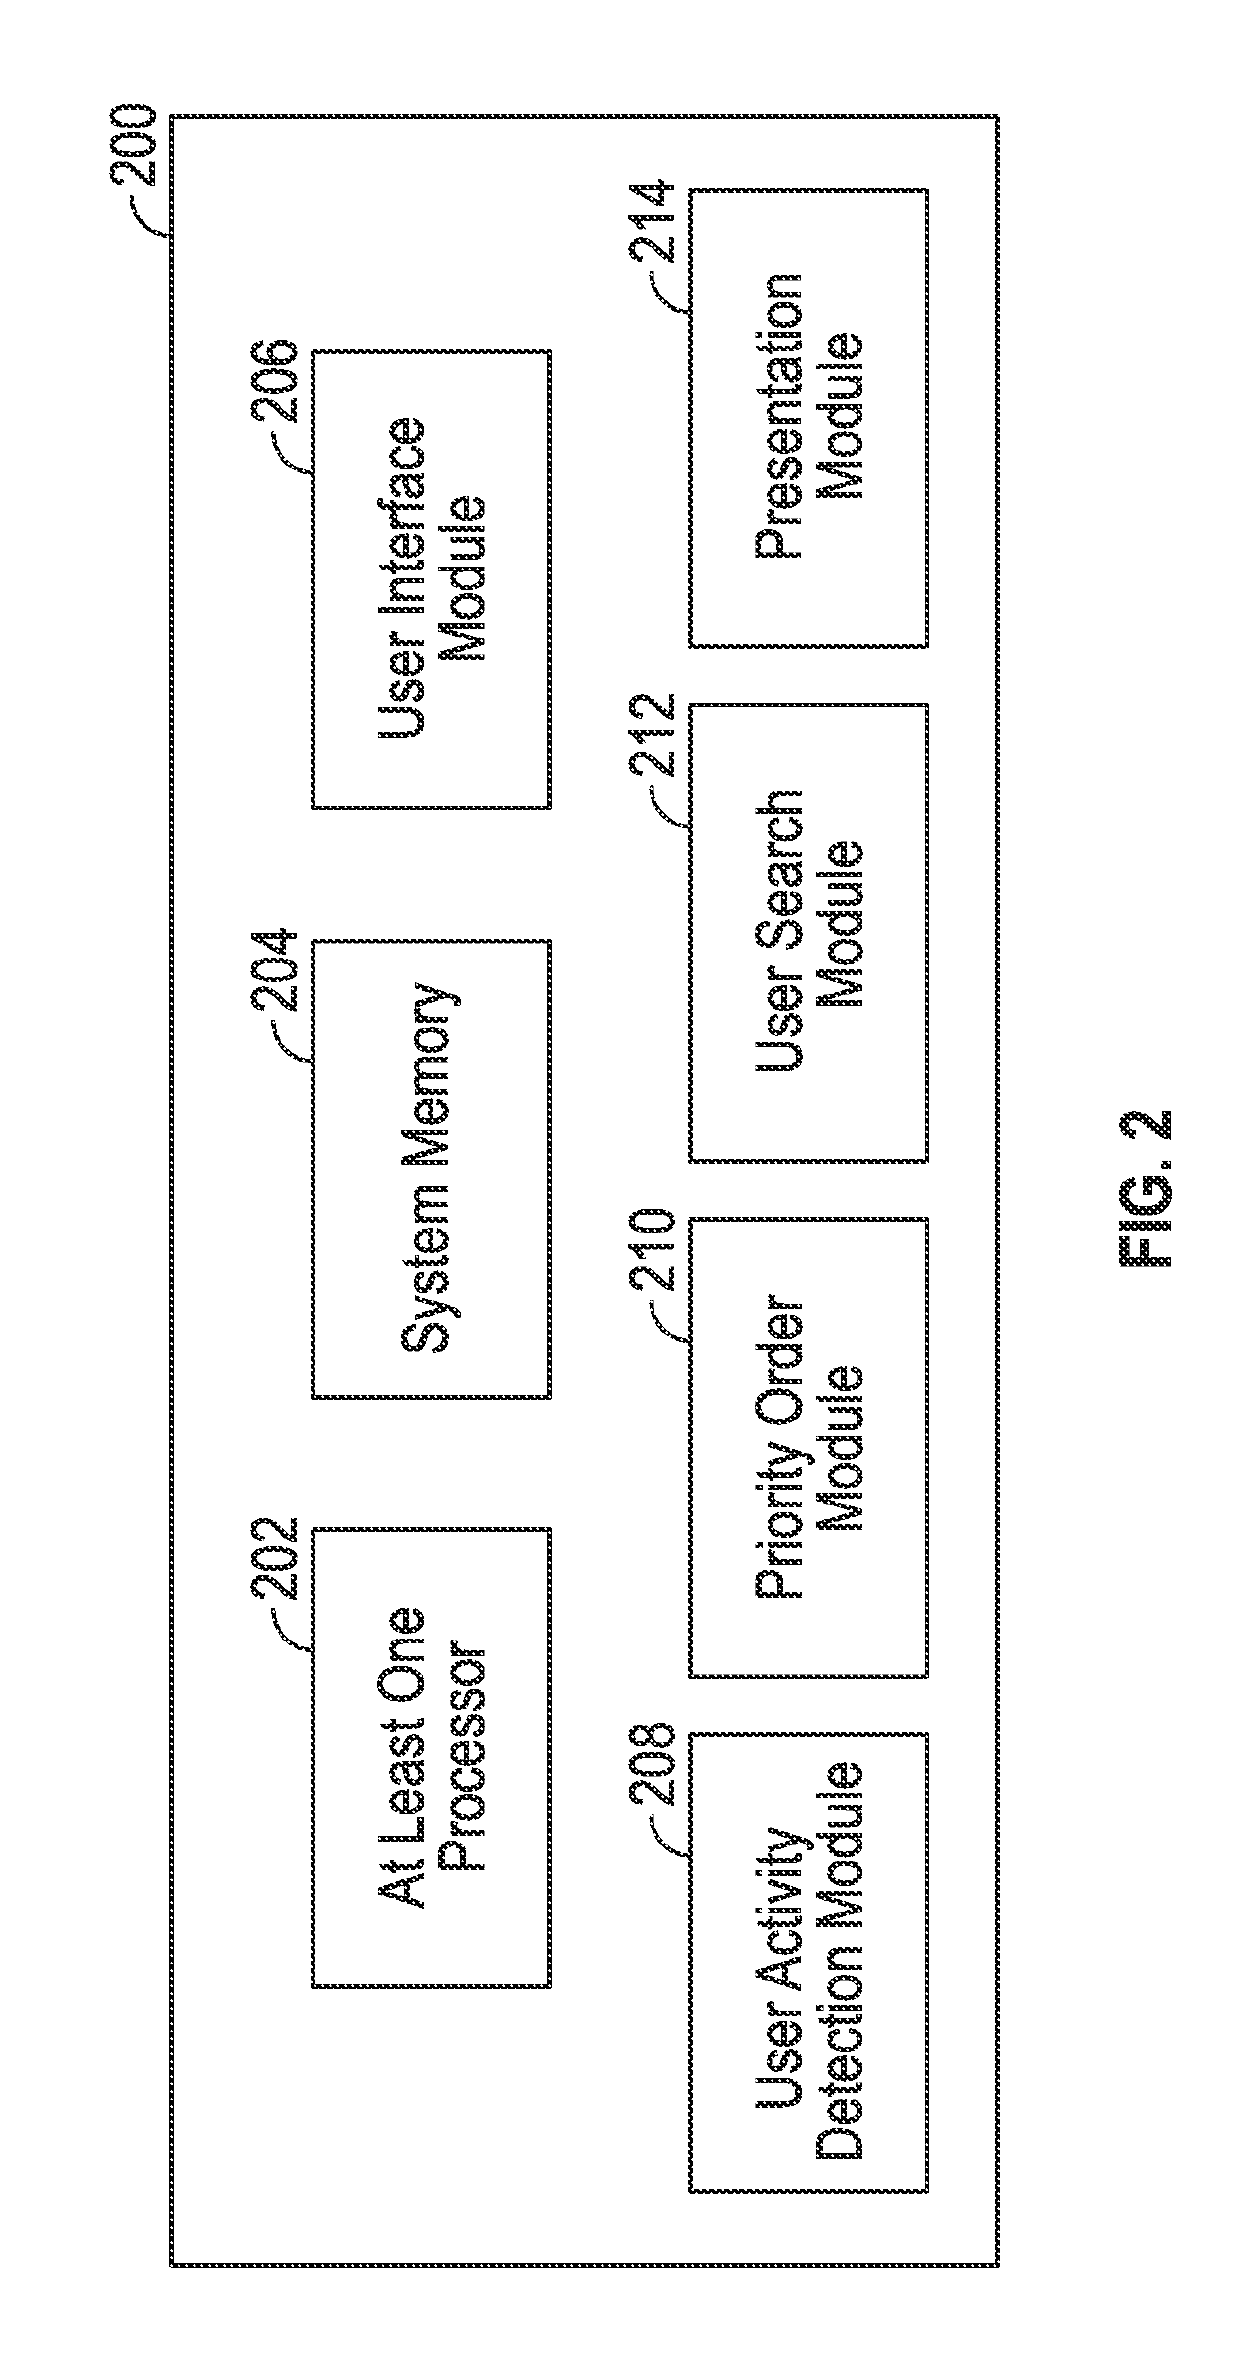 Methods and apparatus for presenting search results according to a priority order determined by user activity